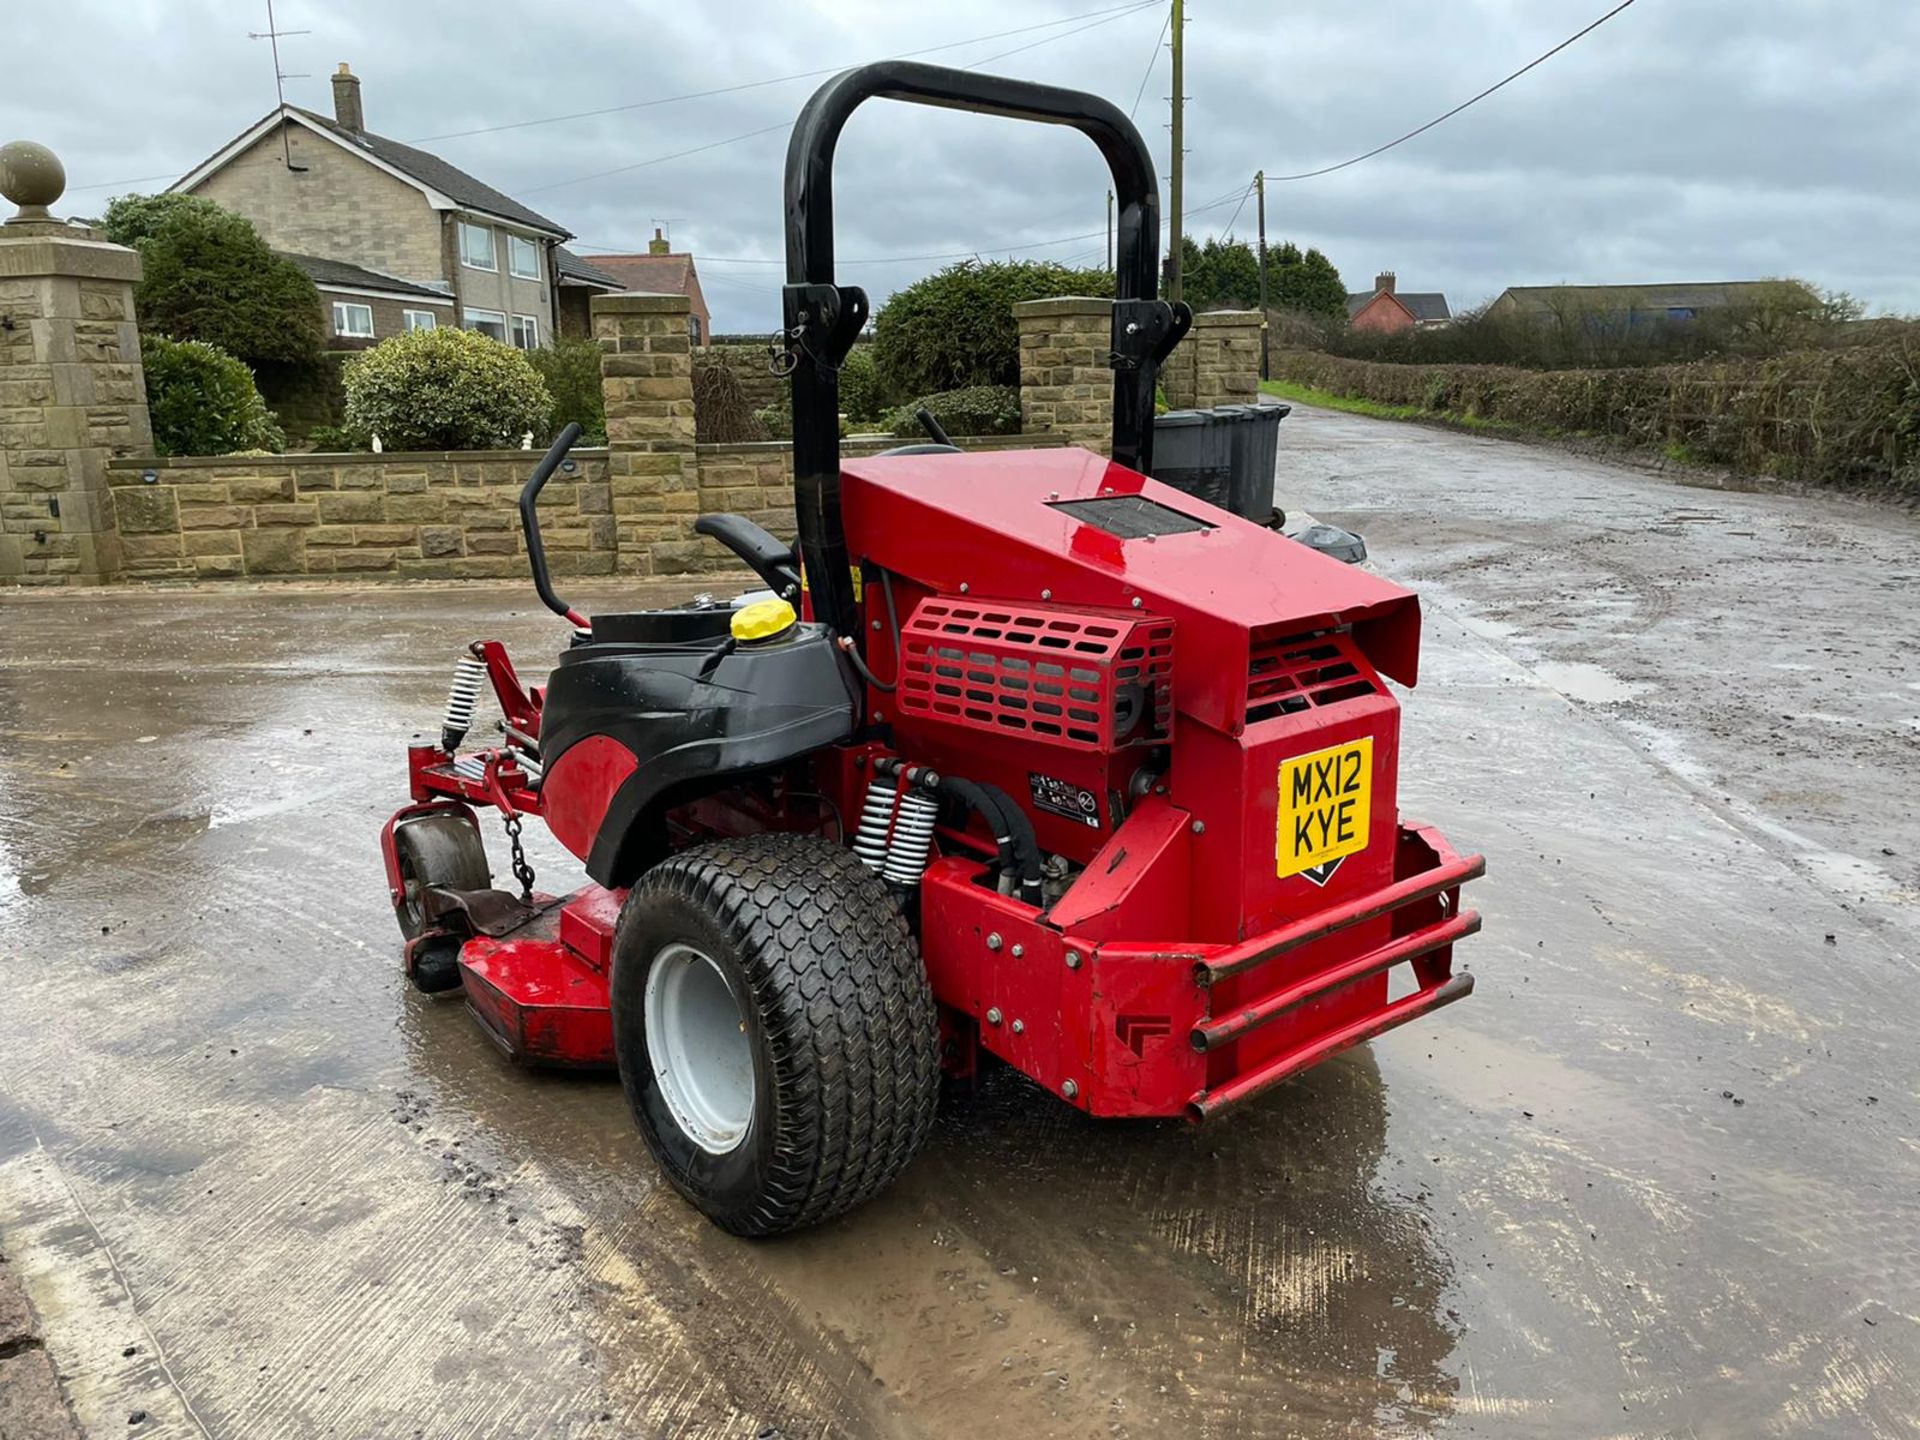 2012 FERRIS IS5000Z ZERO TURN MOWER, RUNS, DRIVES AND CUTS, IN USED BUT GOOD CONDITION *NO VAT* - Image 2 of 5